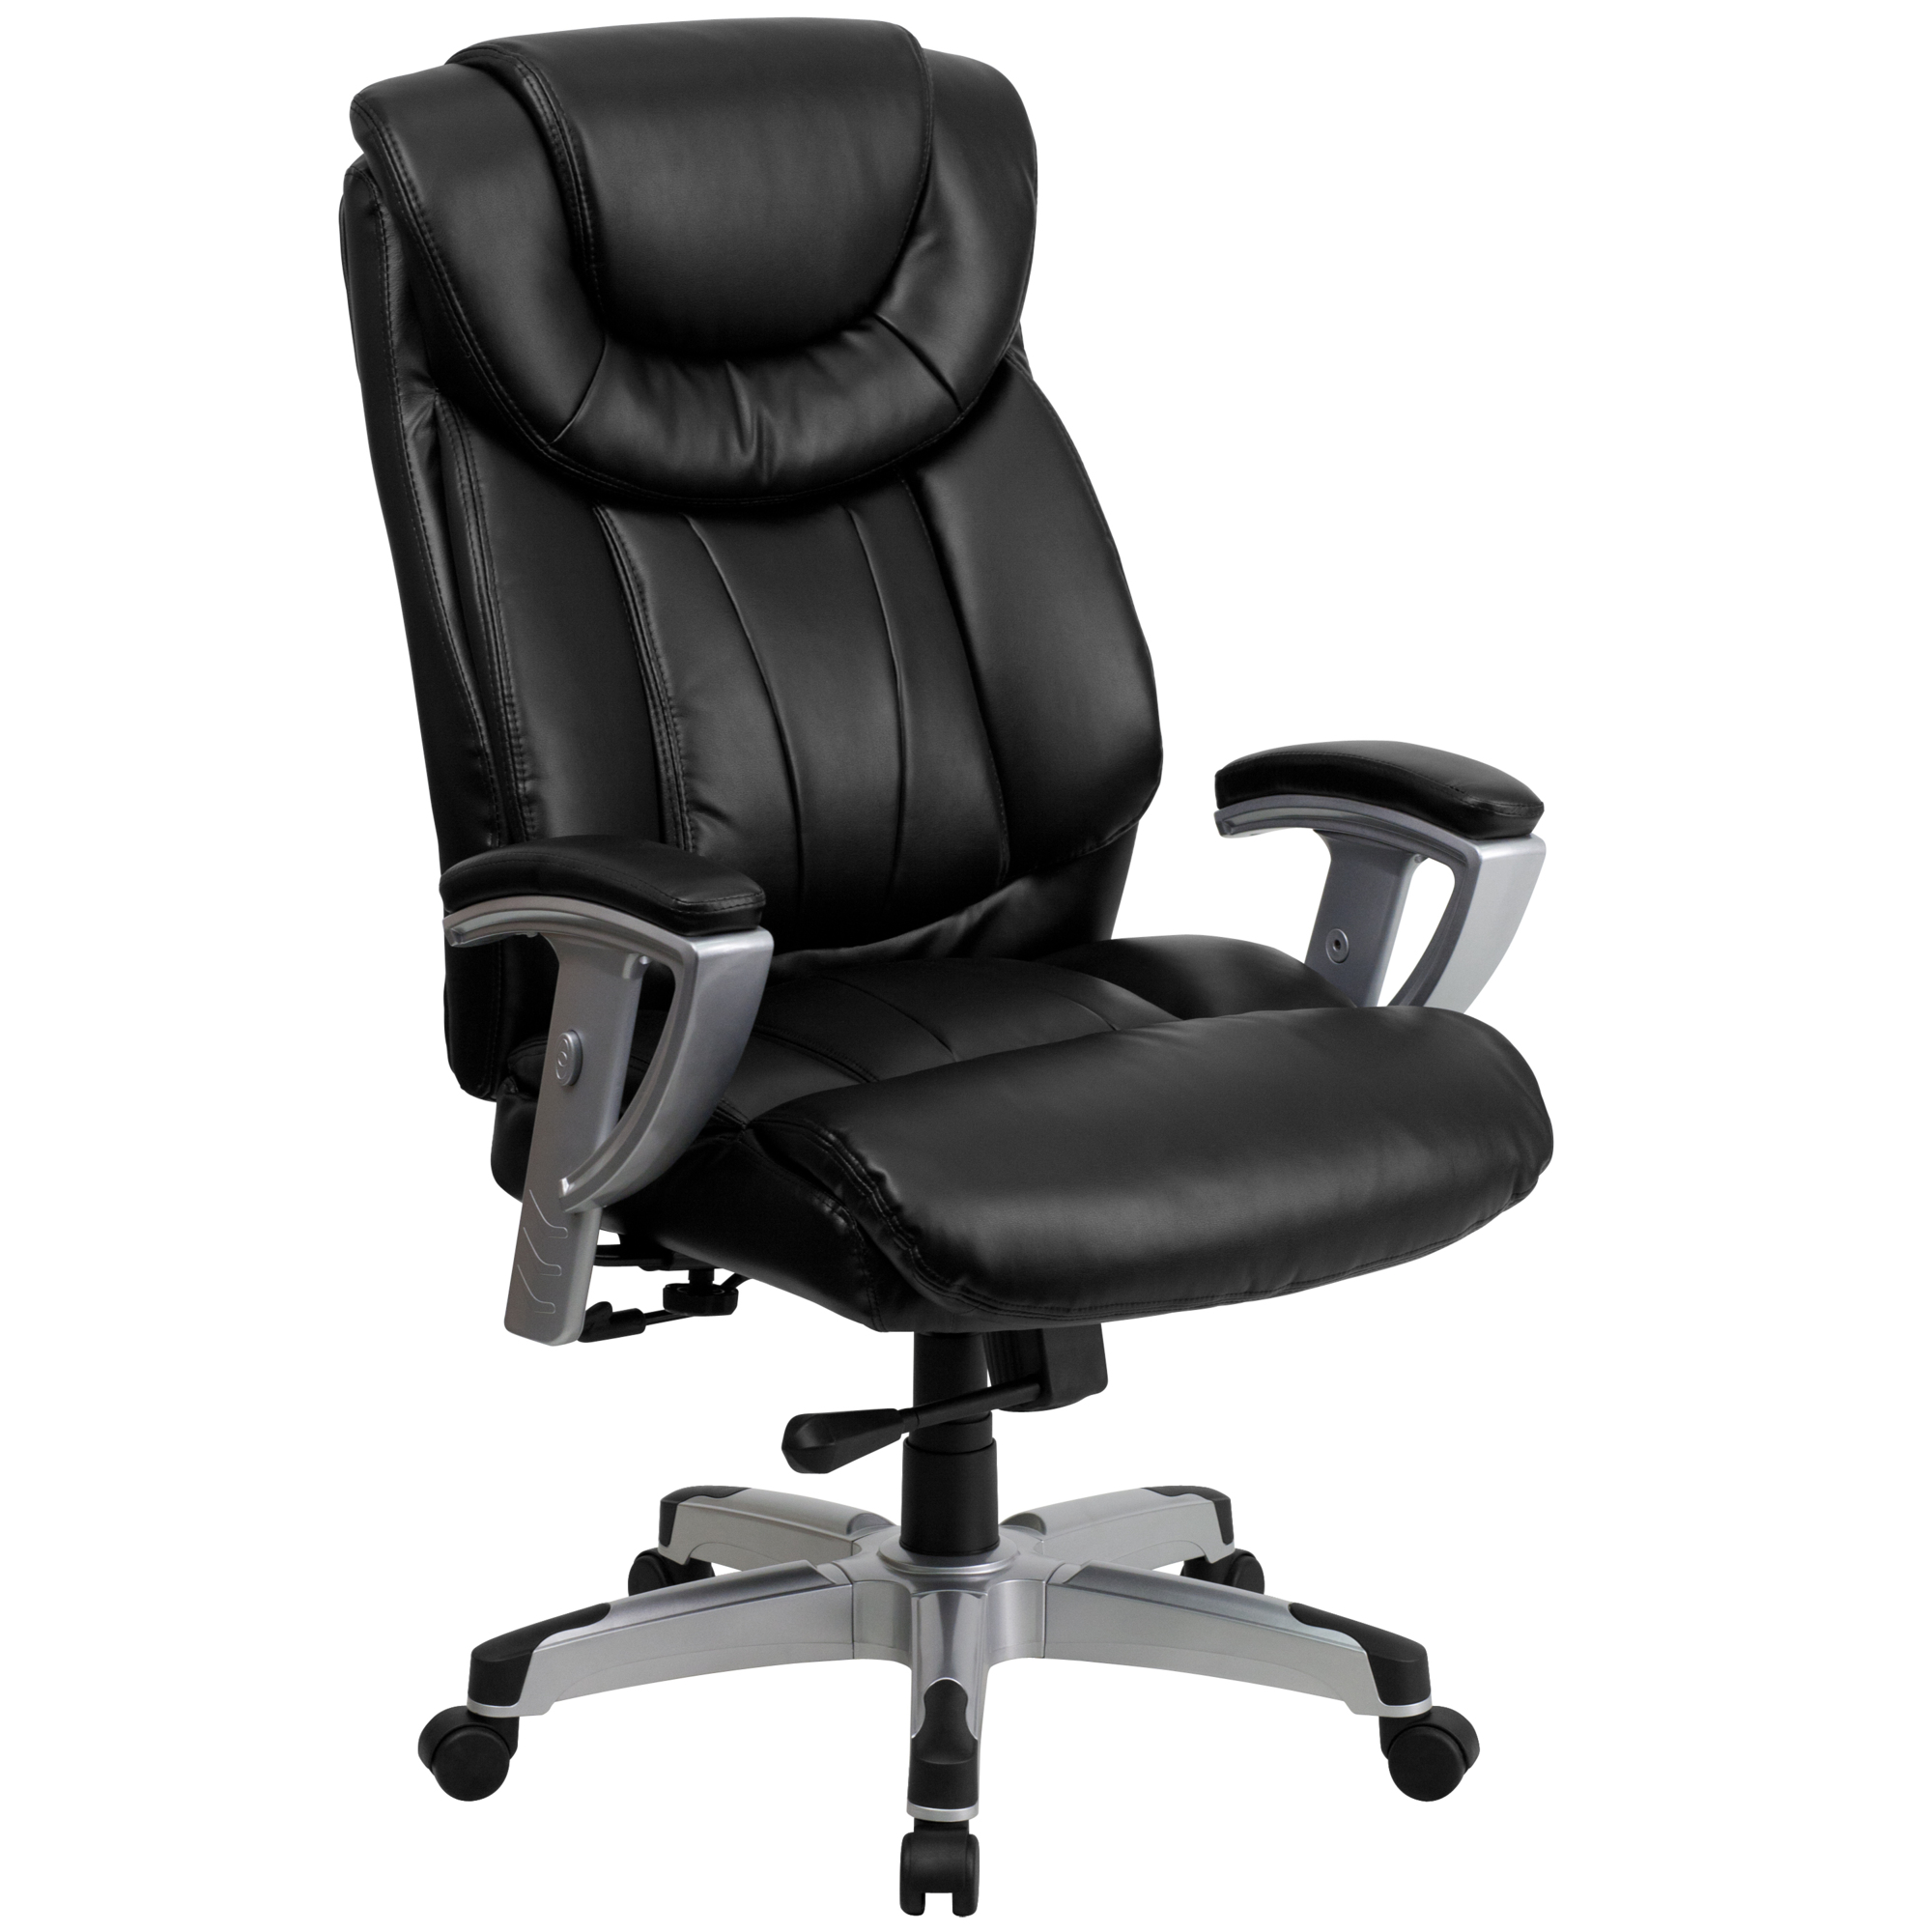 Flash Furniture, 400 lb. Rated High Back Black LeatherSoft Chair, Primary Color Black, Included (qty.) 1, Model GO1534BKLEA